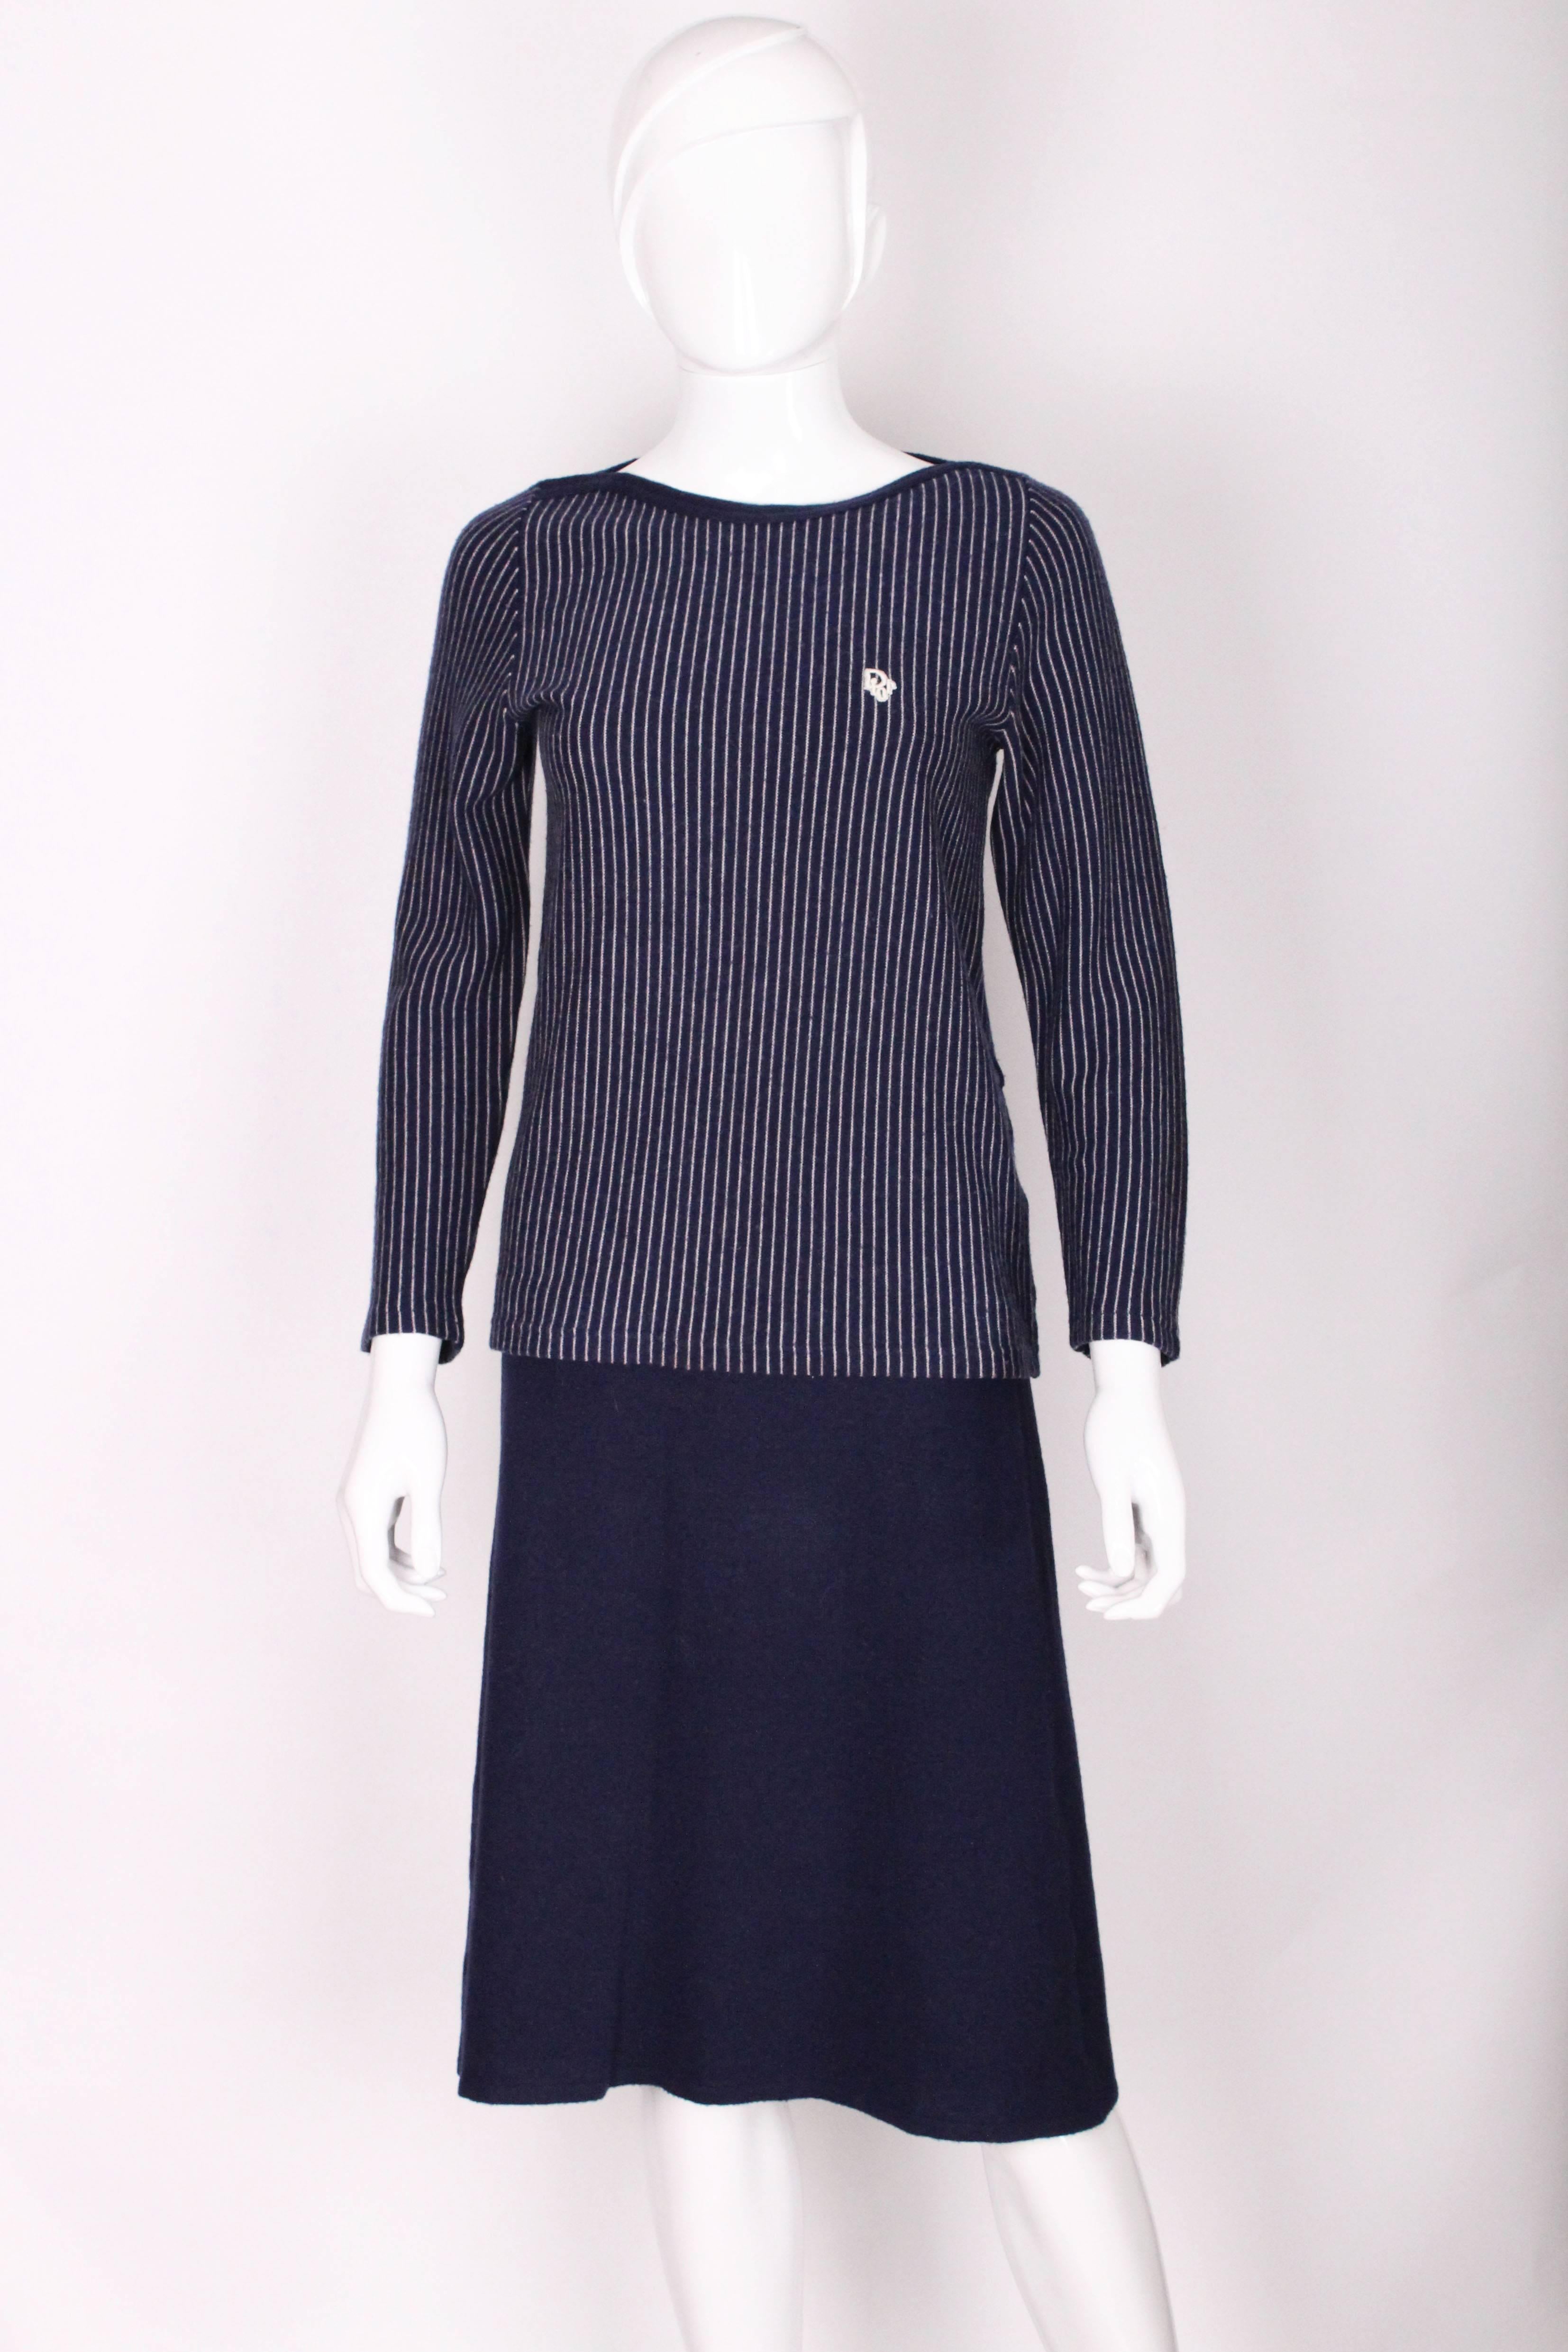 Women's 1970's Christian Dior London Knitted  2 Piece